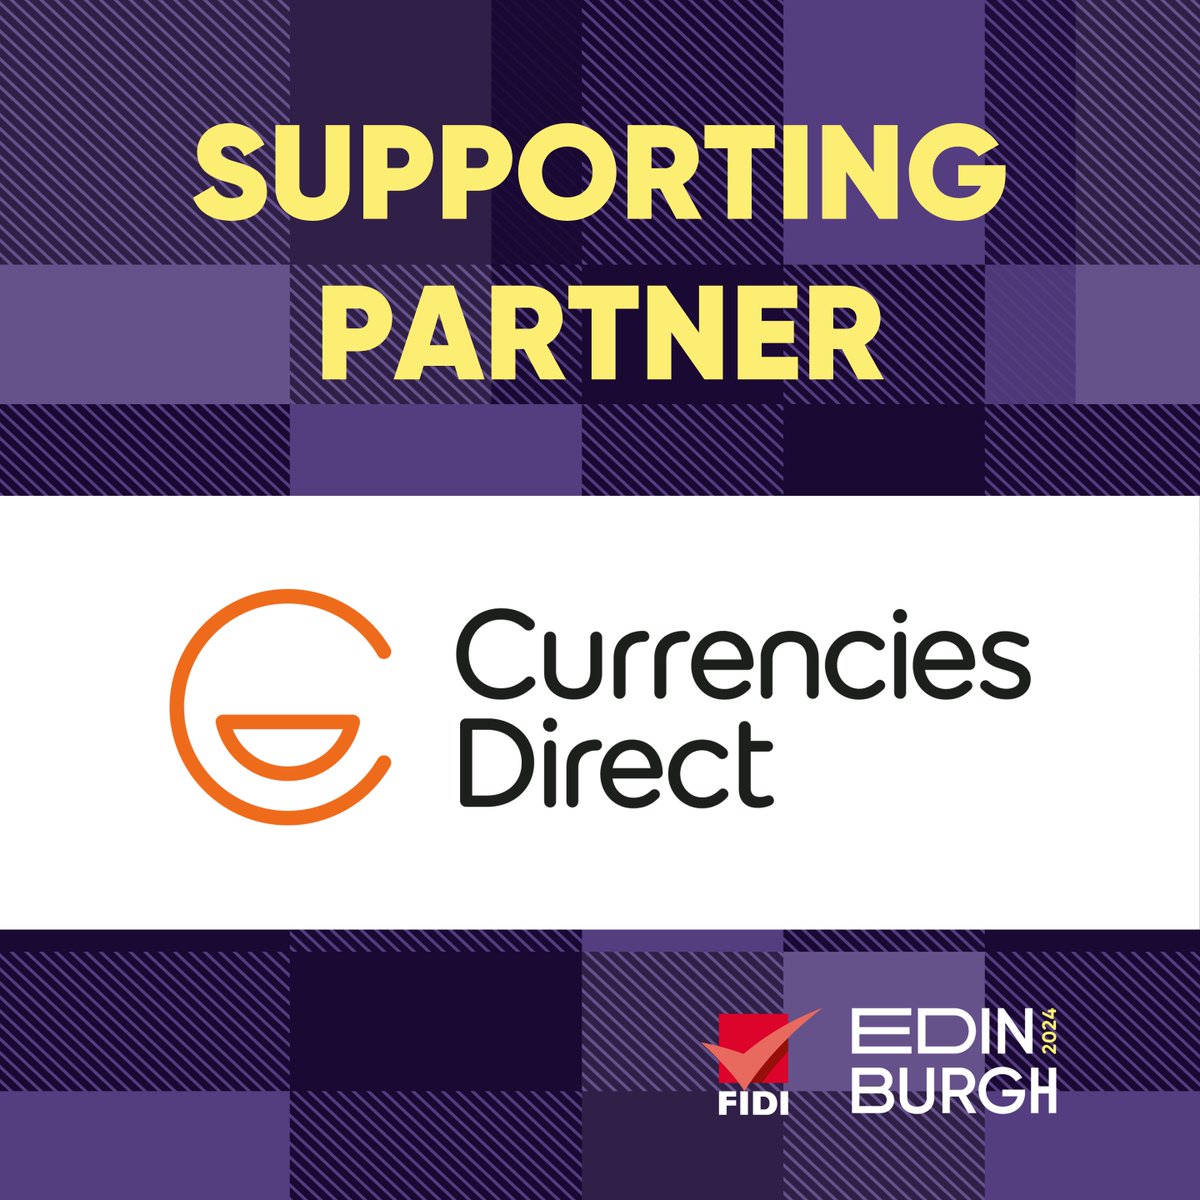 🌍 #2024FIDIconference: Thank you, @currenciesd, partner of the 2024 FIDI Conference in Edinburgh! Get the app to connect with attendees, book meetings & view your agenda : Google Play Store➡️ lnkd.in/e86wv6Jv Apple App Store➡️ lnkd.in/e7XJ6xun